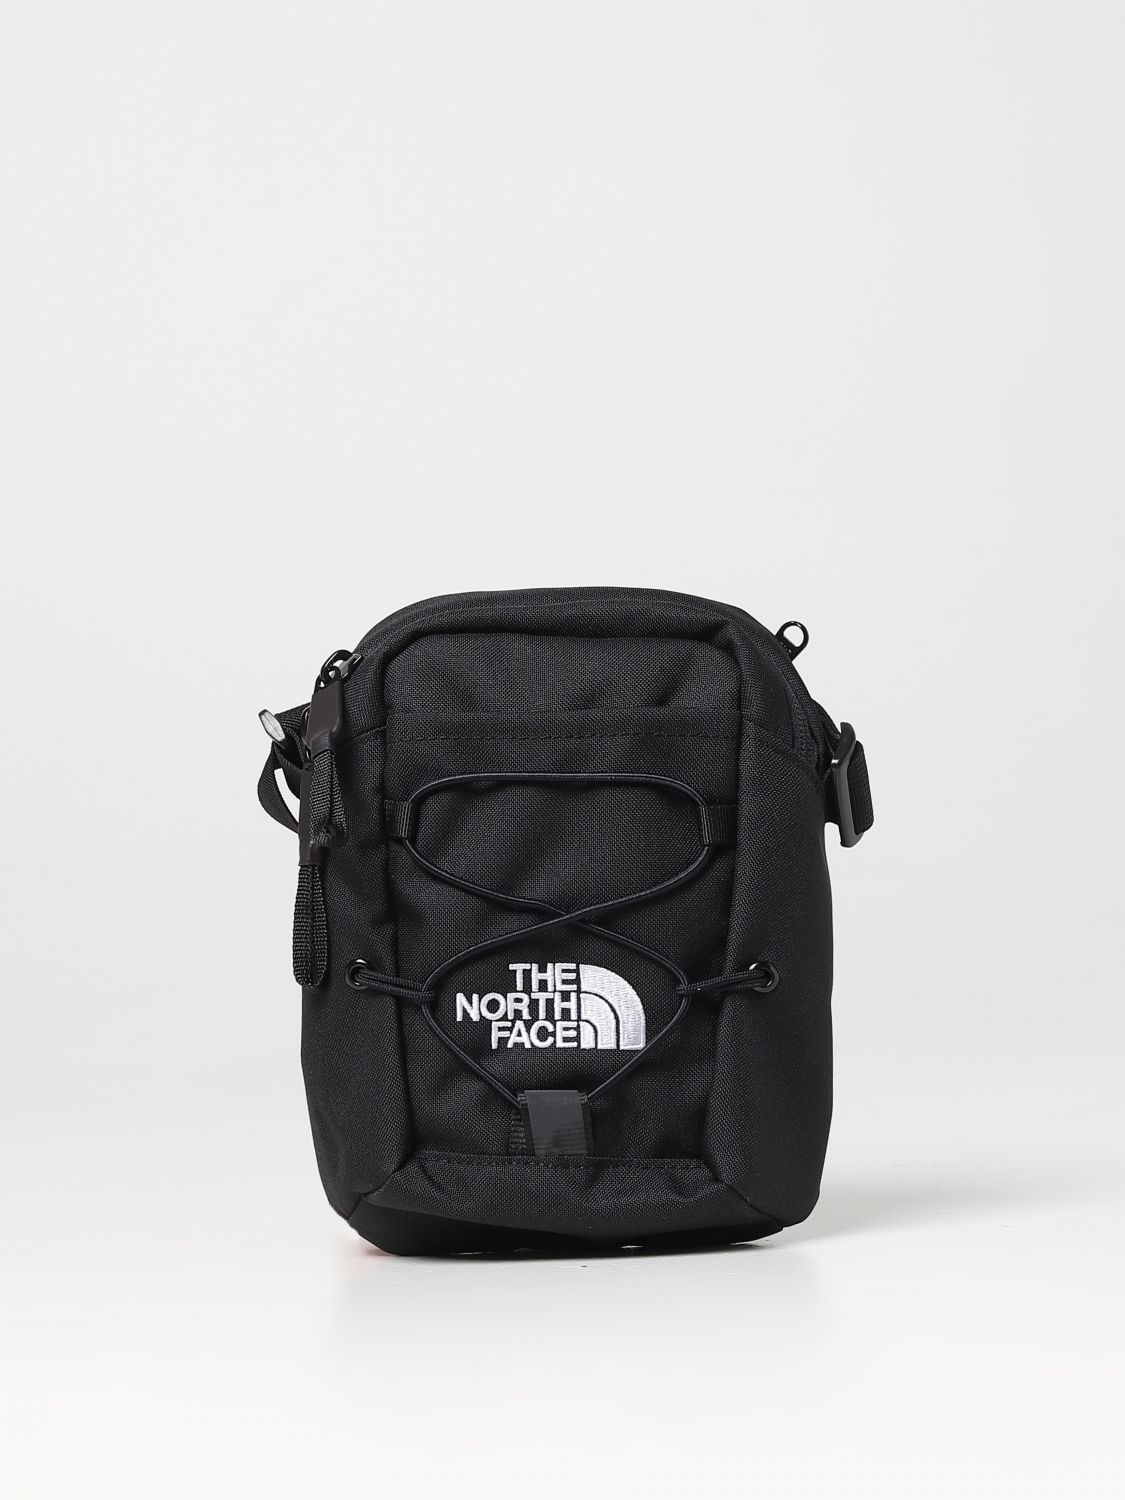 overdrijven Superioriteit top THE NORTH FACE: shoulder bag for man - Black | The North Face shoulder bag  NF0A52UC online on GIGLIO.COM